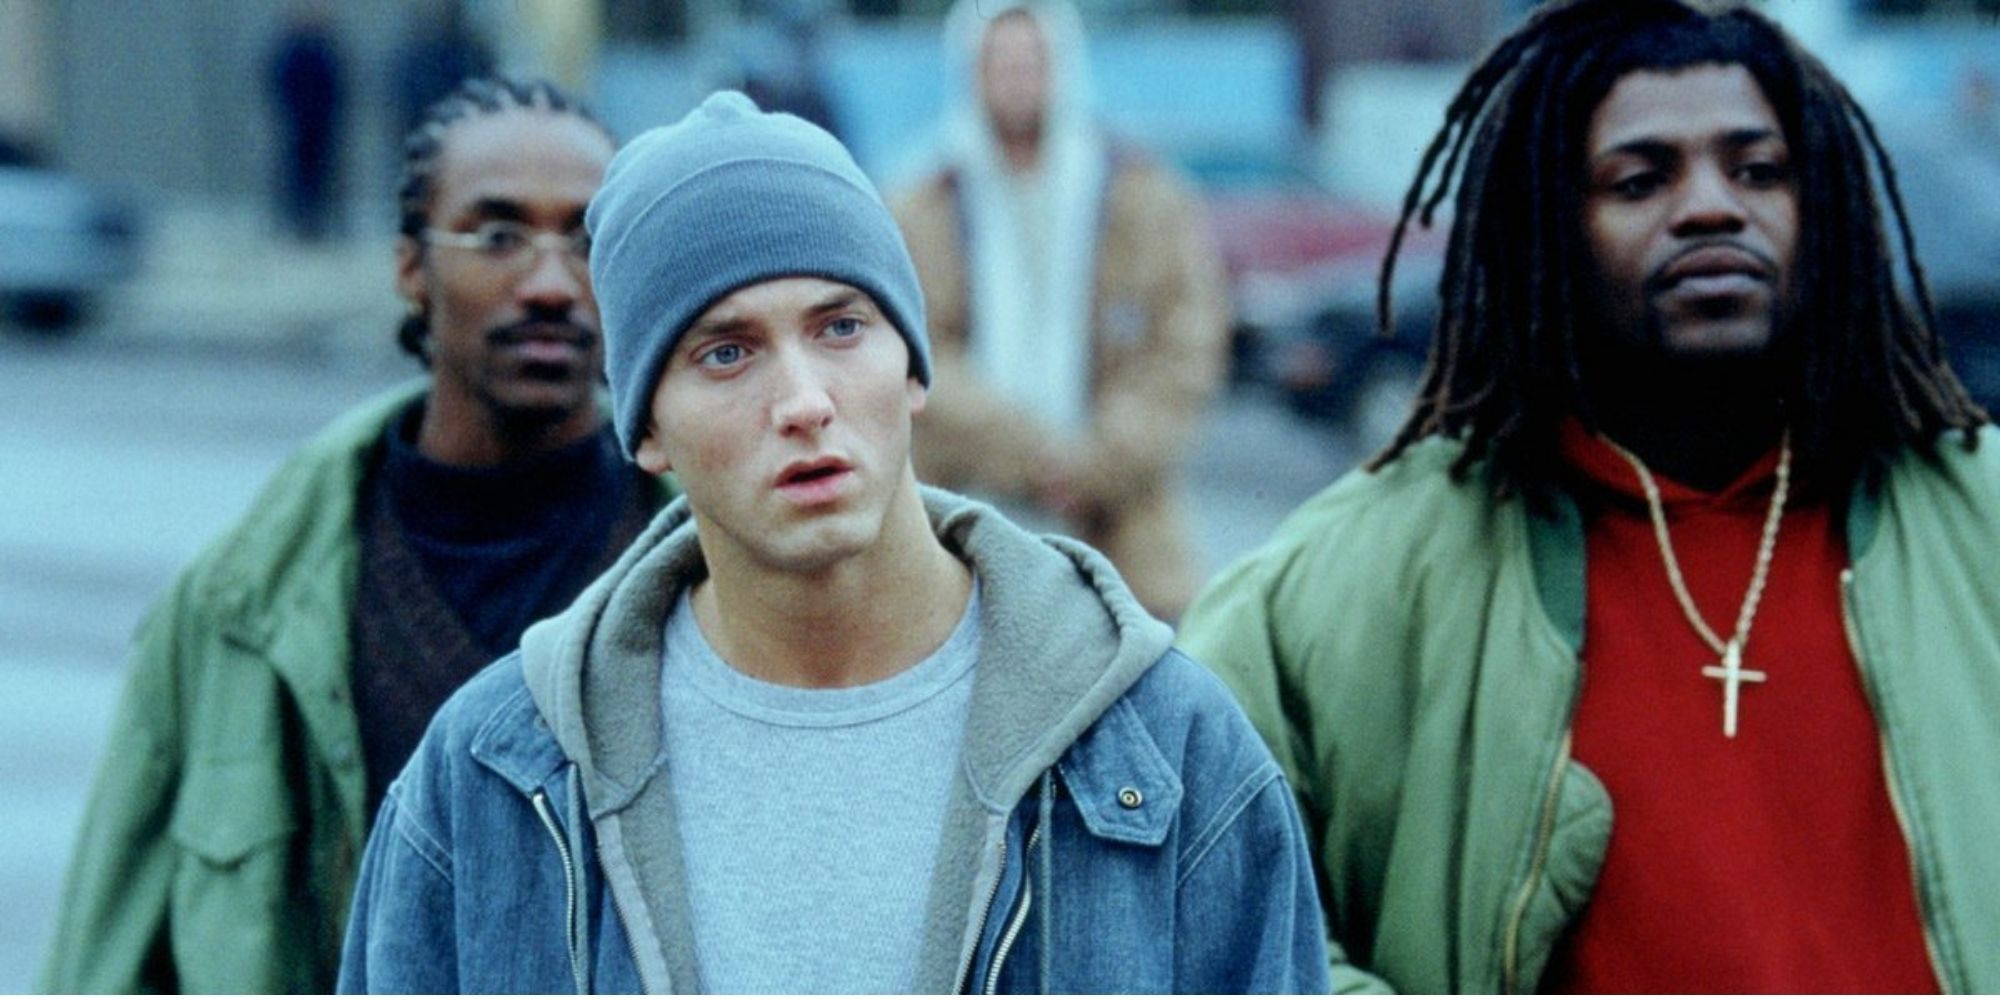 Jimmy (Eminem) and his friends in '8 Mile'